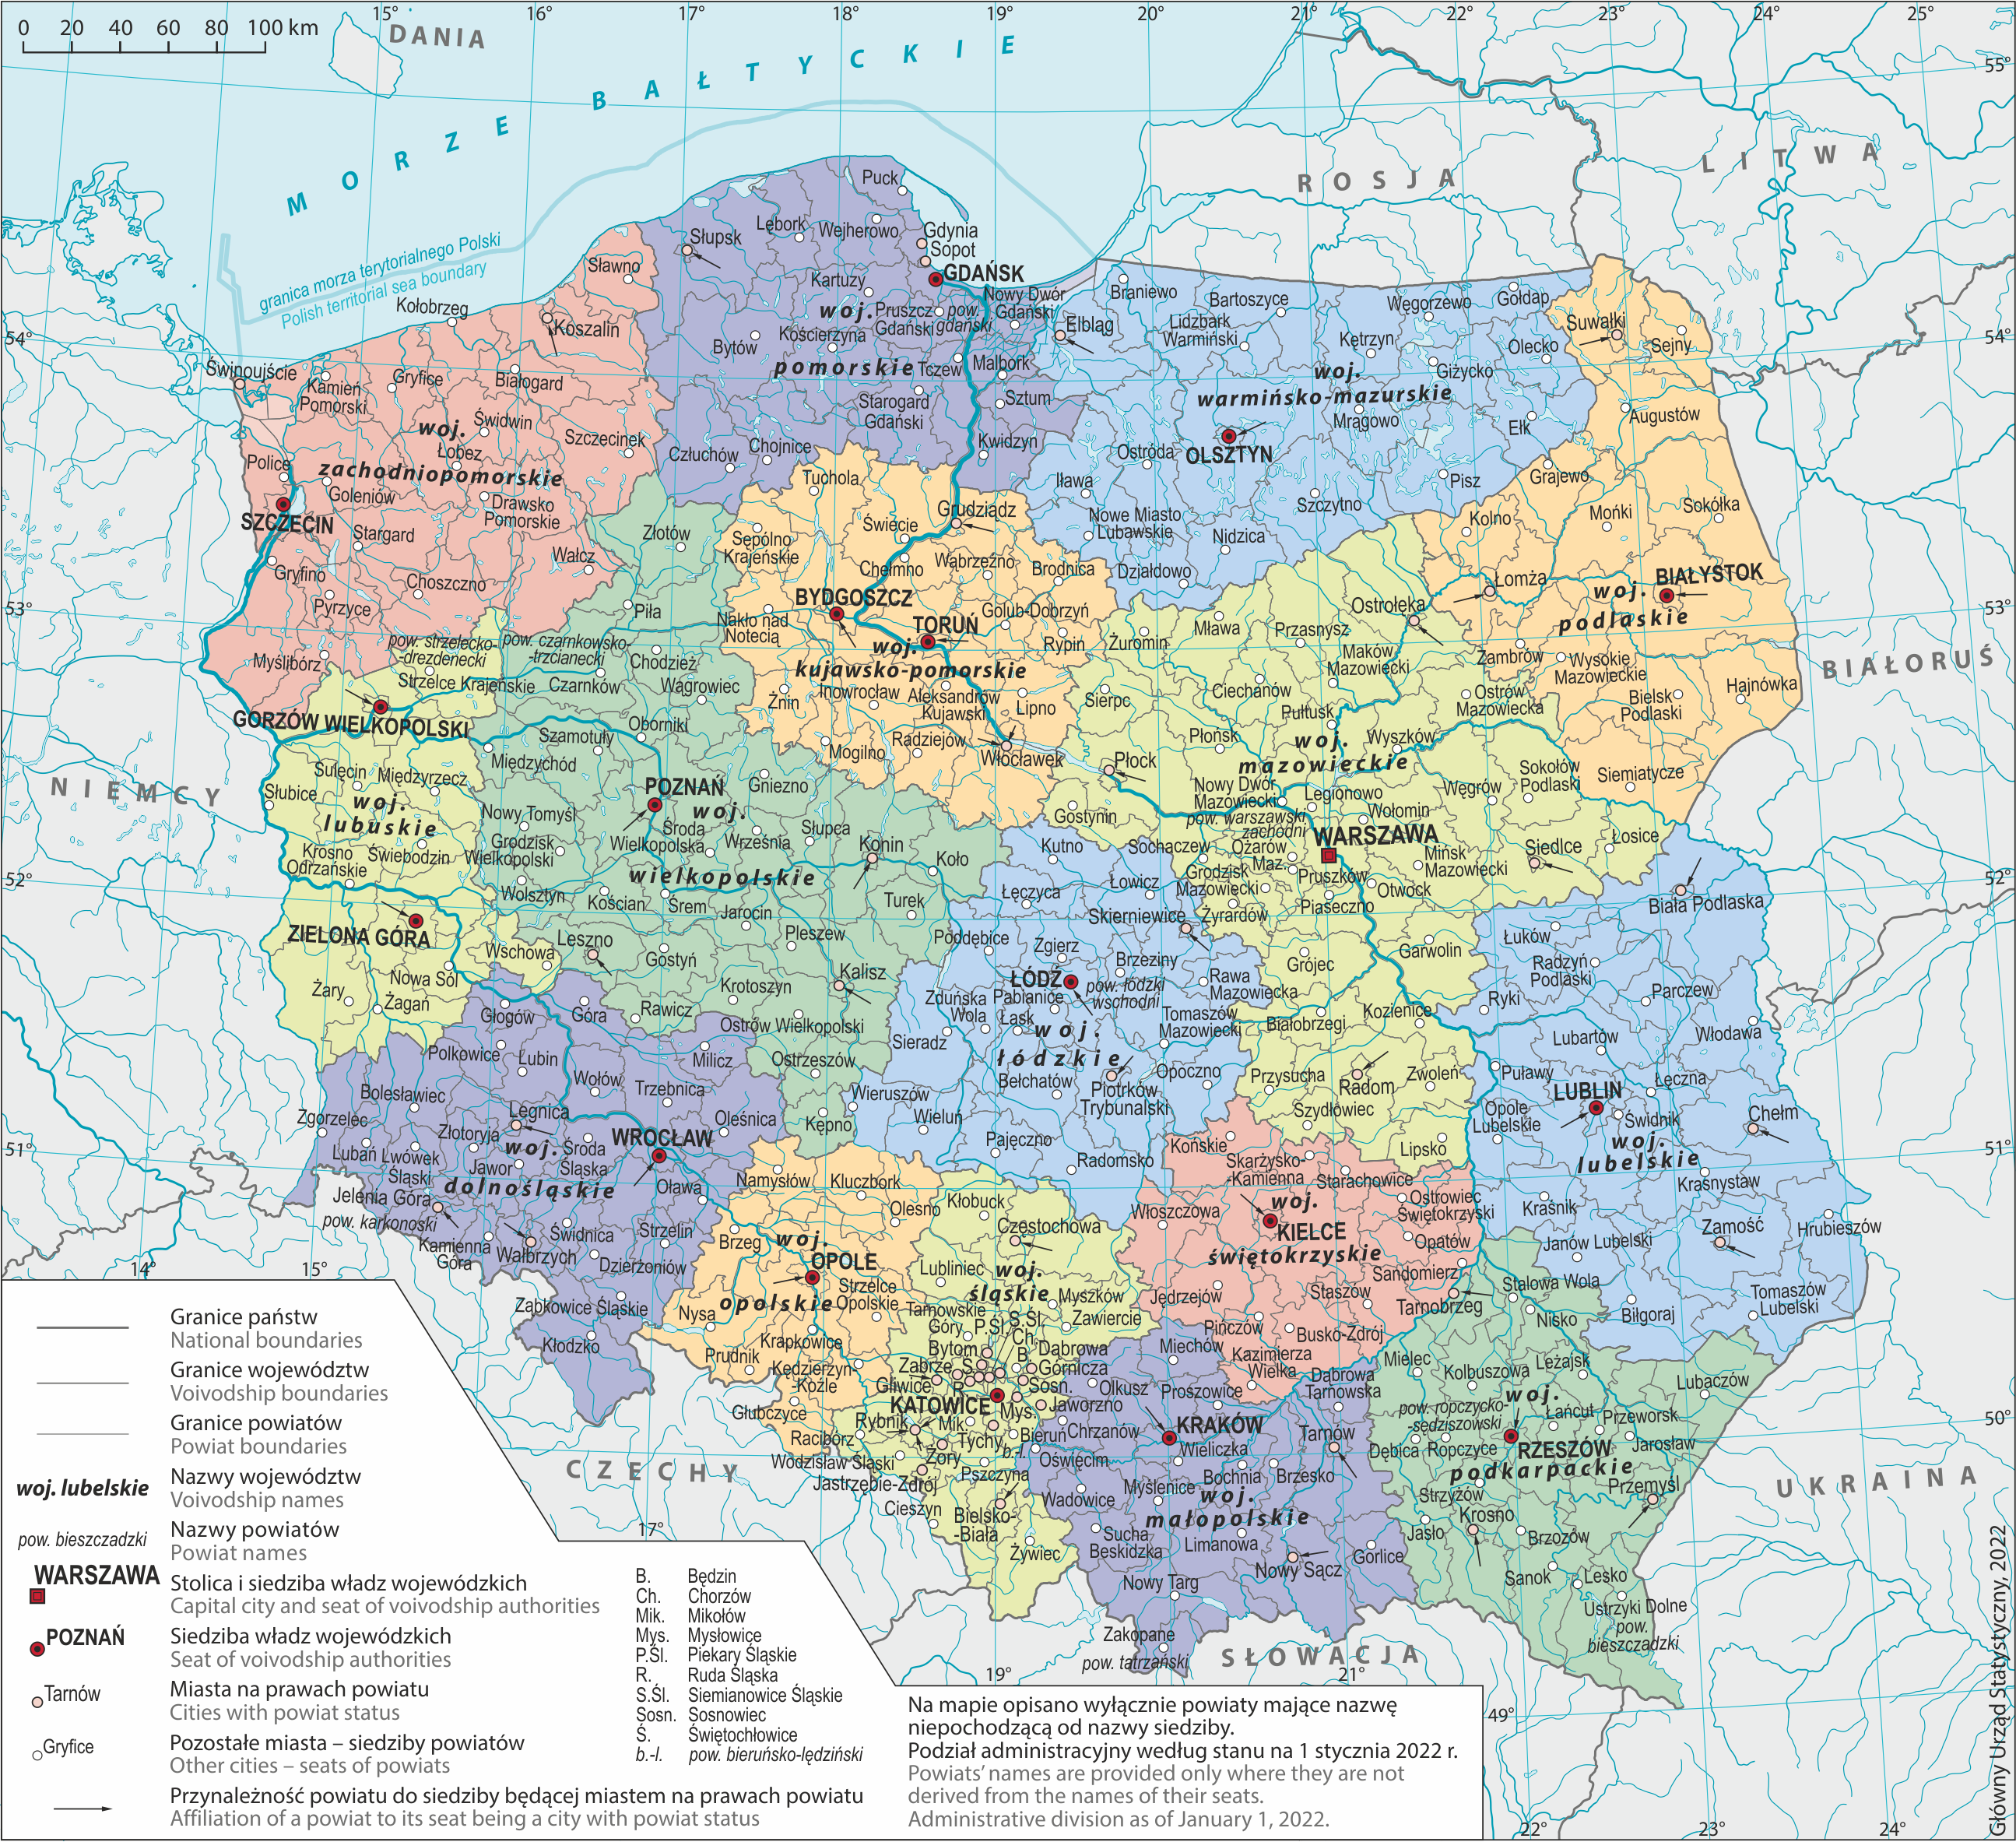 Administrative division of Poland into voivodships and powiats as of 1 January 2022